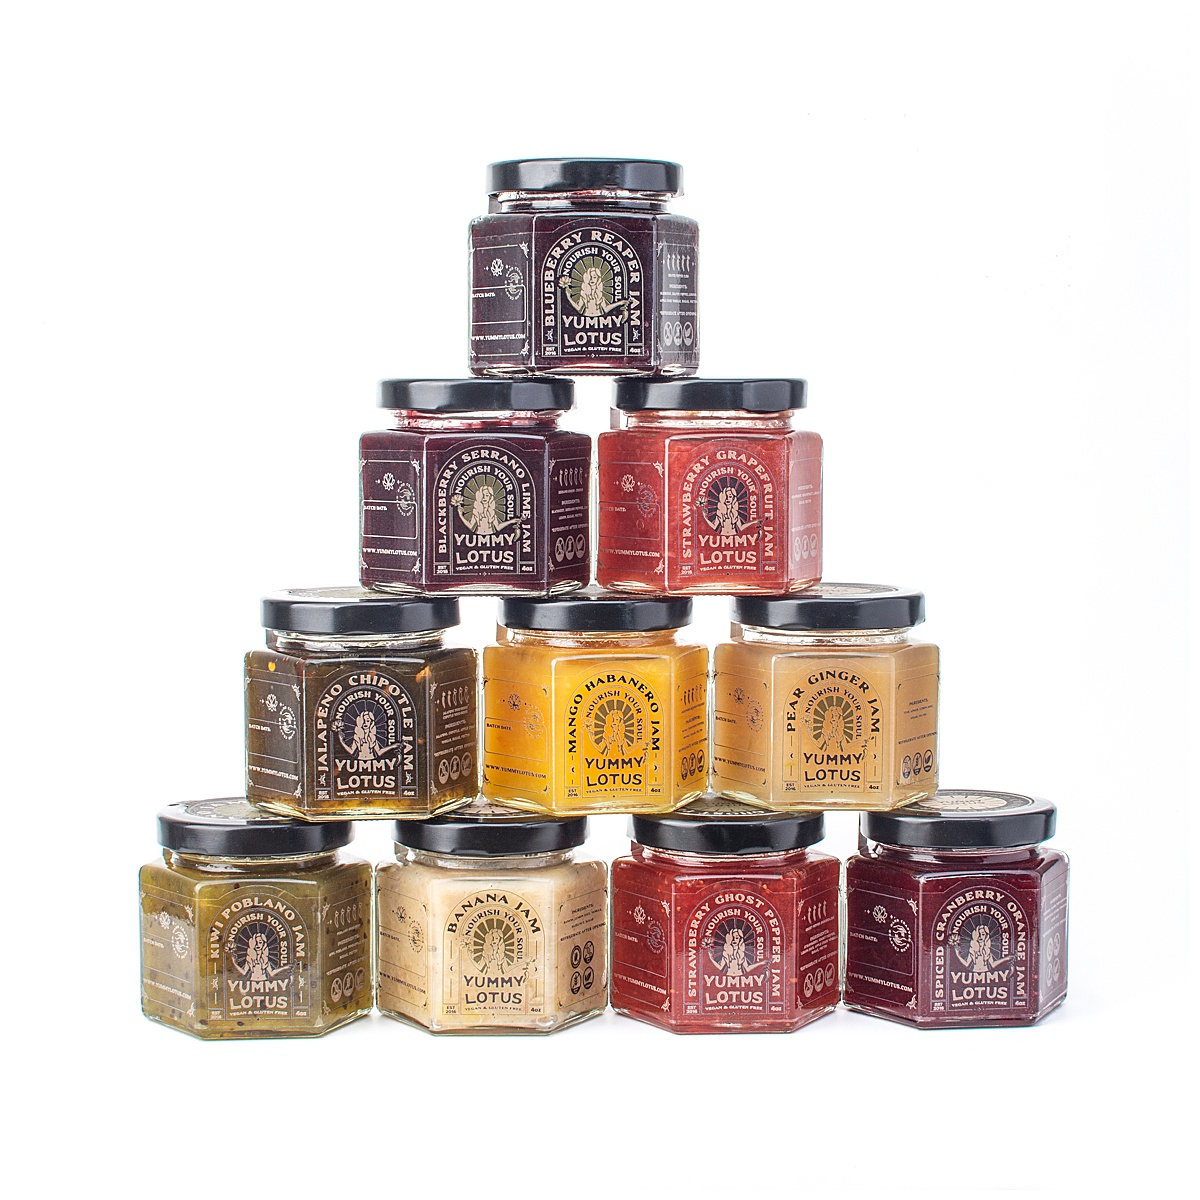 E-commerce product on white showcasing ten Yummy Lotus jams stacked in a pyramid.